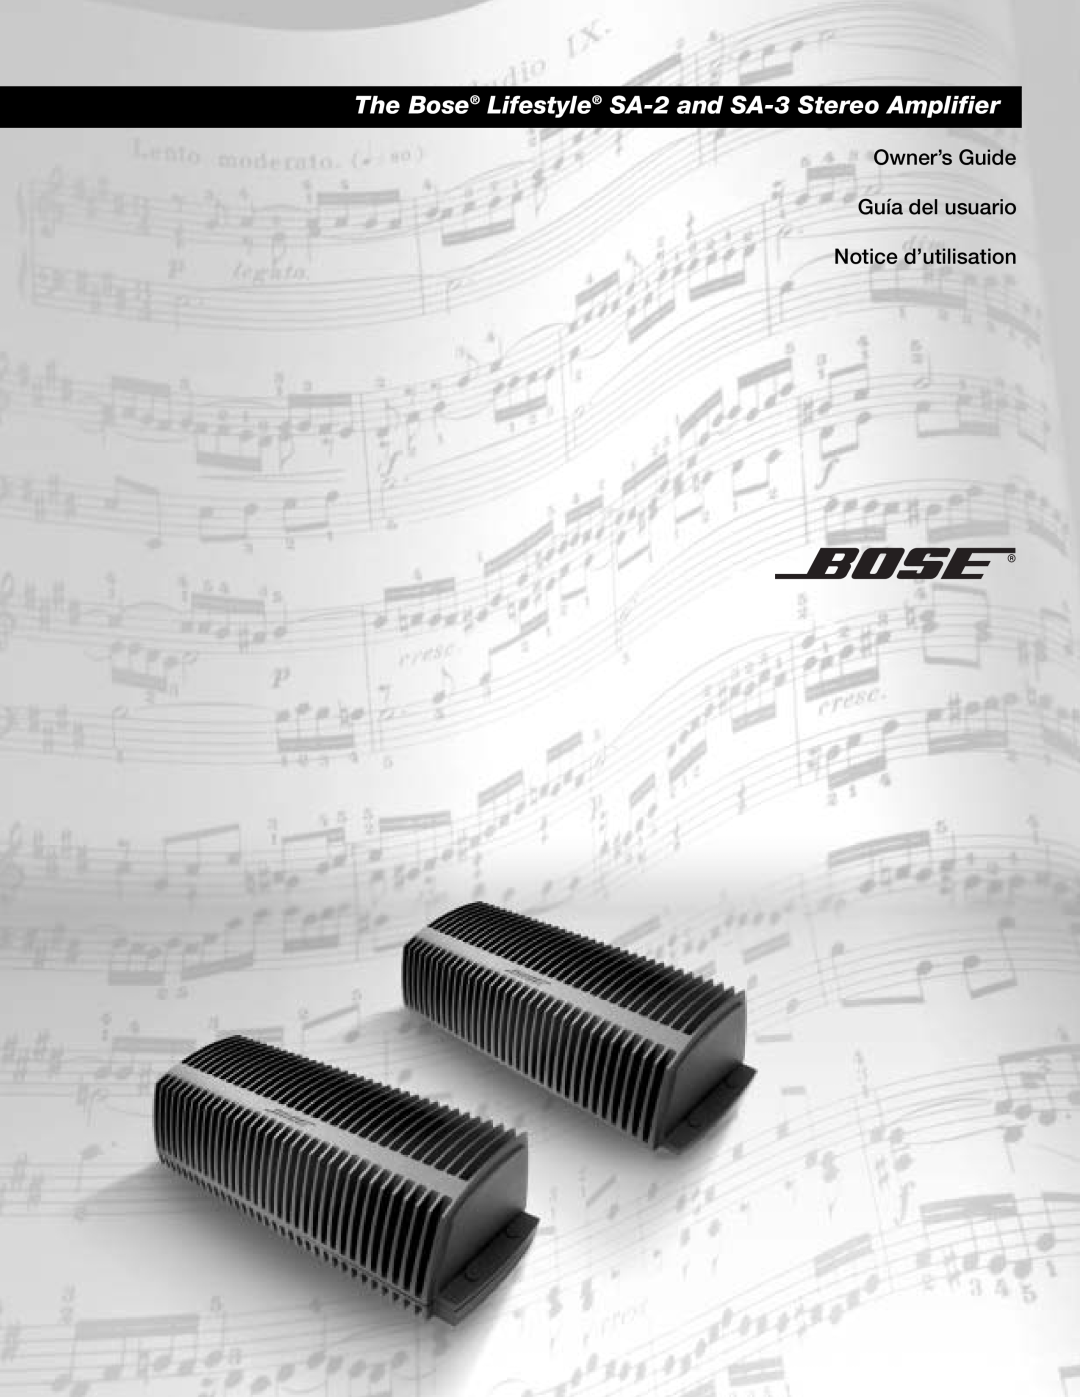 Bose manual The Bose Lifestyle SA-2and SA-3Stereo Amplifier, Owner’s Guide 